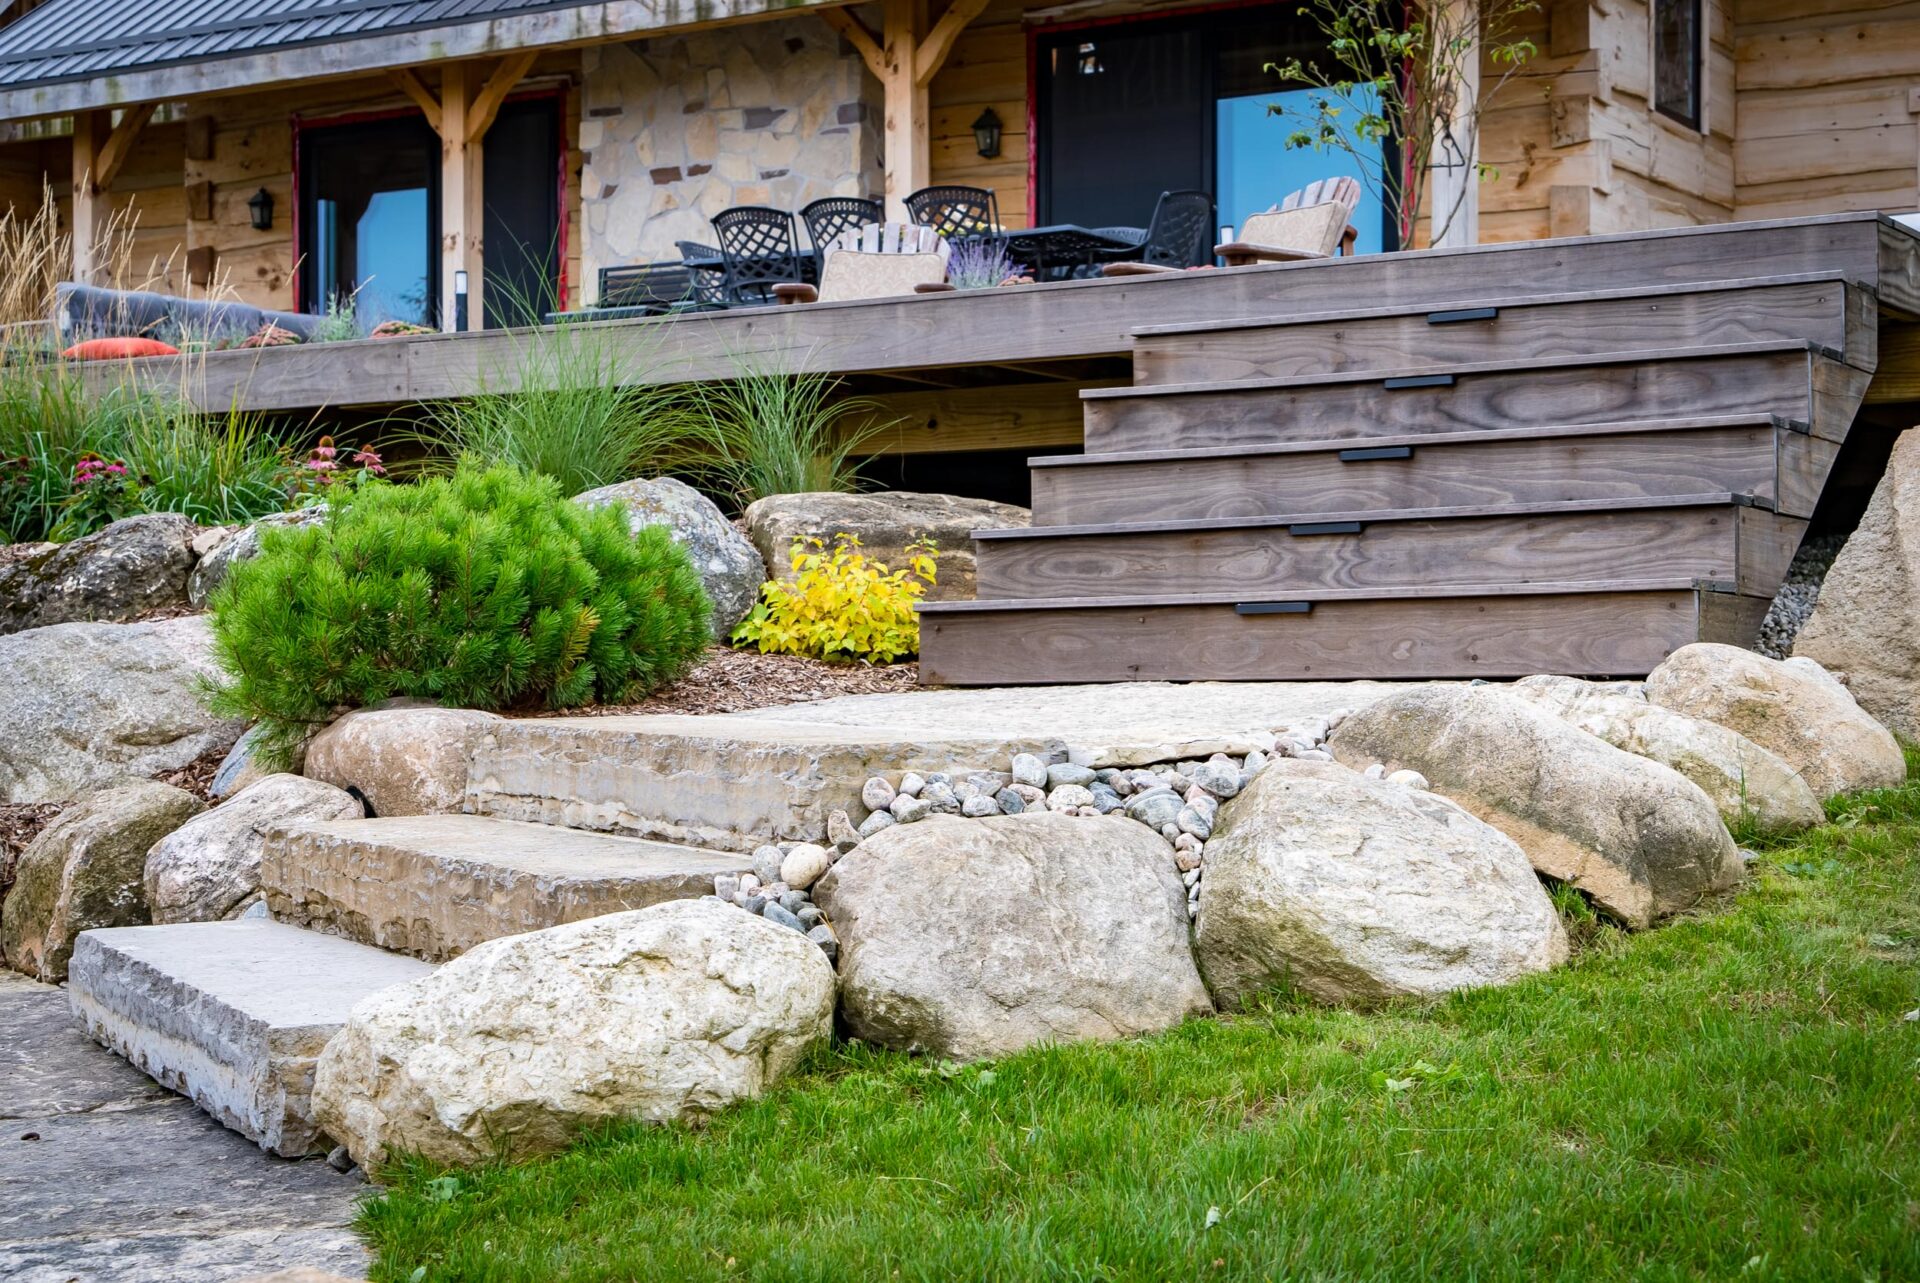 A rustic wooden house with a deck, landscaped with natural stone steps, boulders, and green plants. Outdoor furniture is visible in the background.